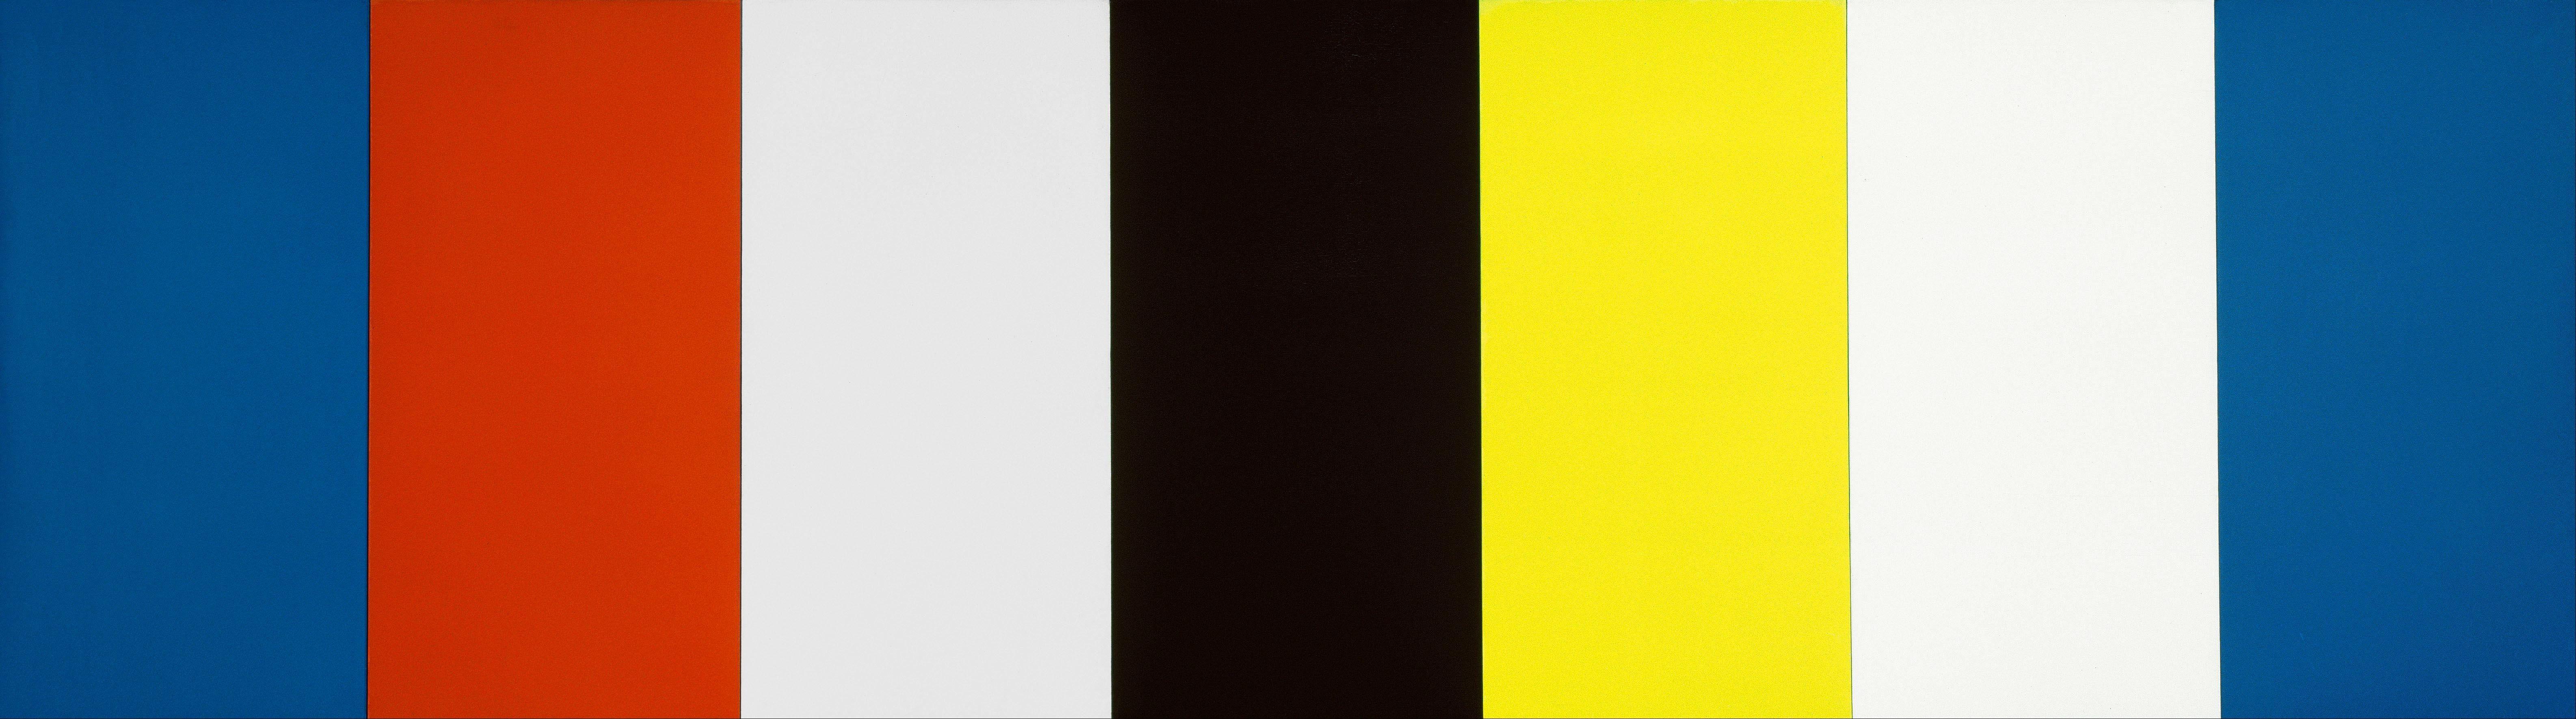 Red White and Yellow Logo - Ellsworth Kelly Yellow Blue White and Black Art